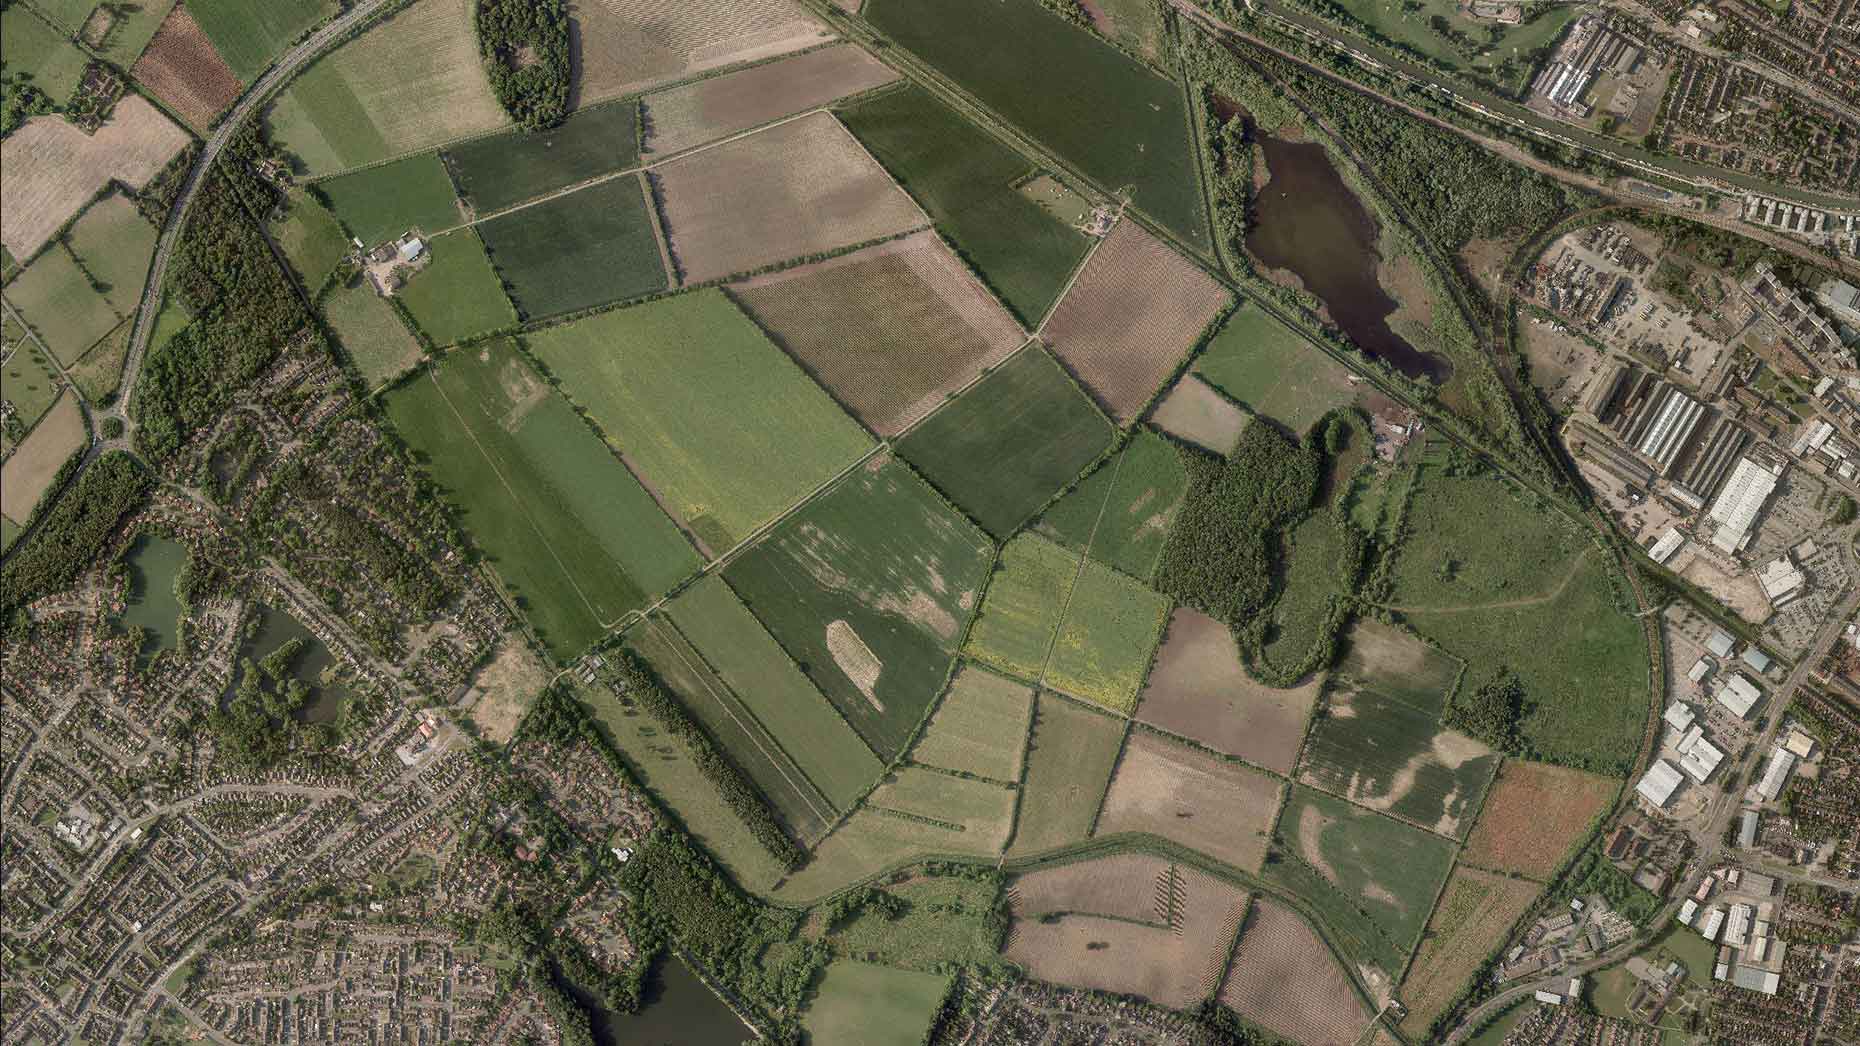 The Western Growth Corridor between Boultham and Birchwood is a 320-hectare site — around 10% of Lincoln's size.